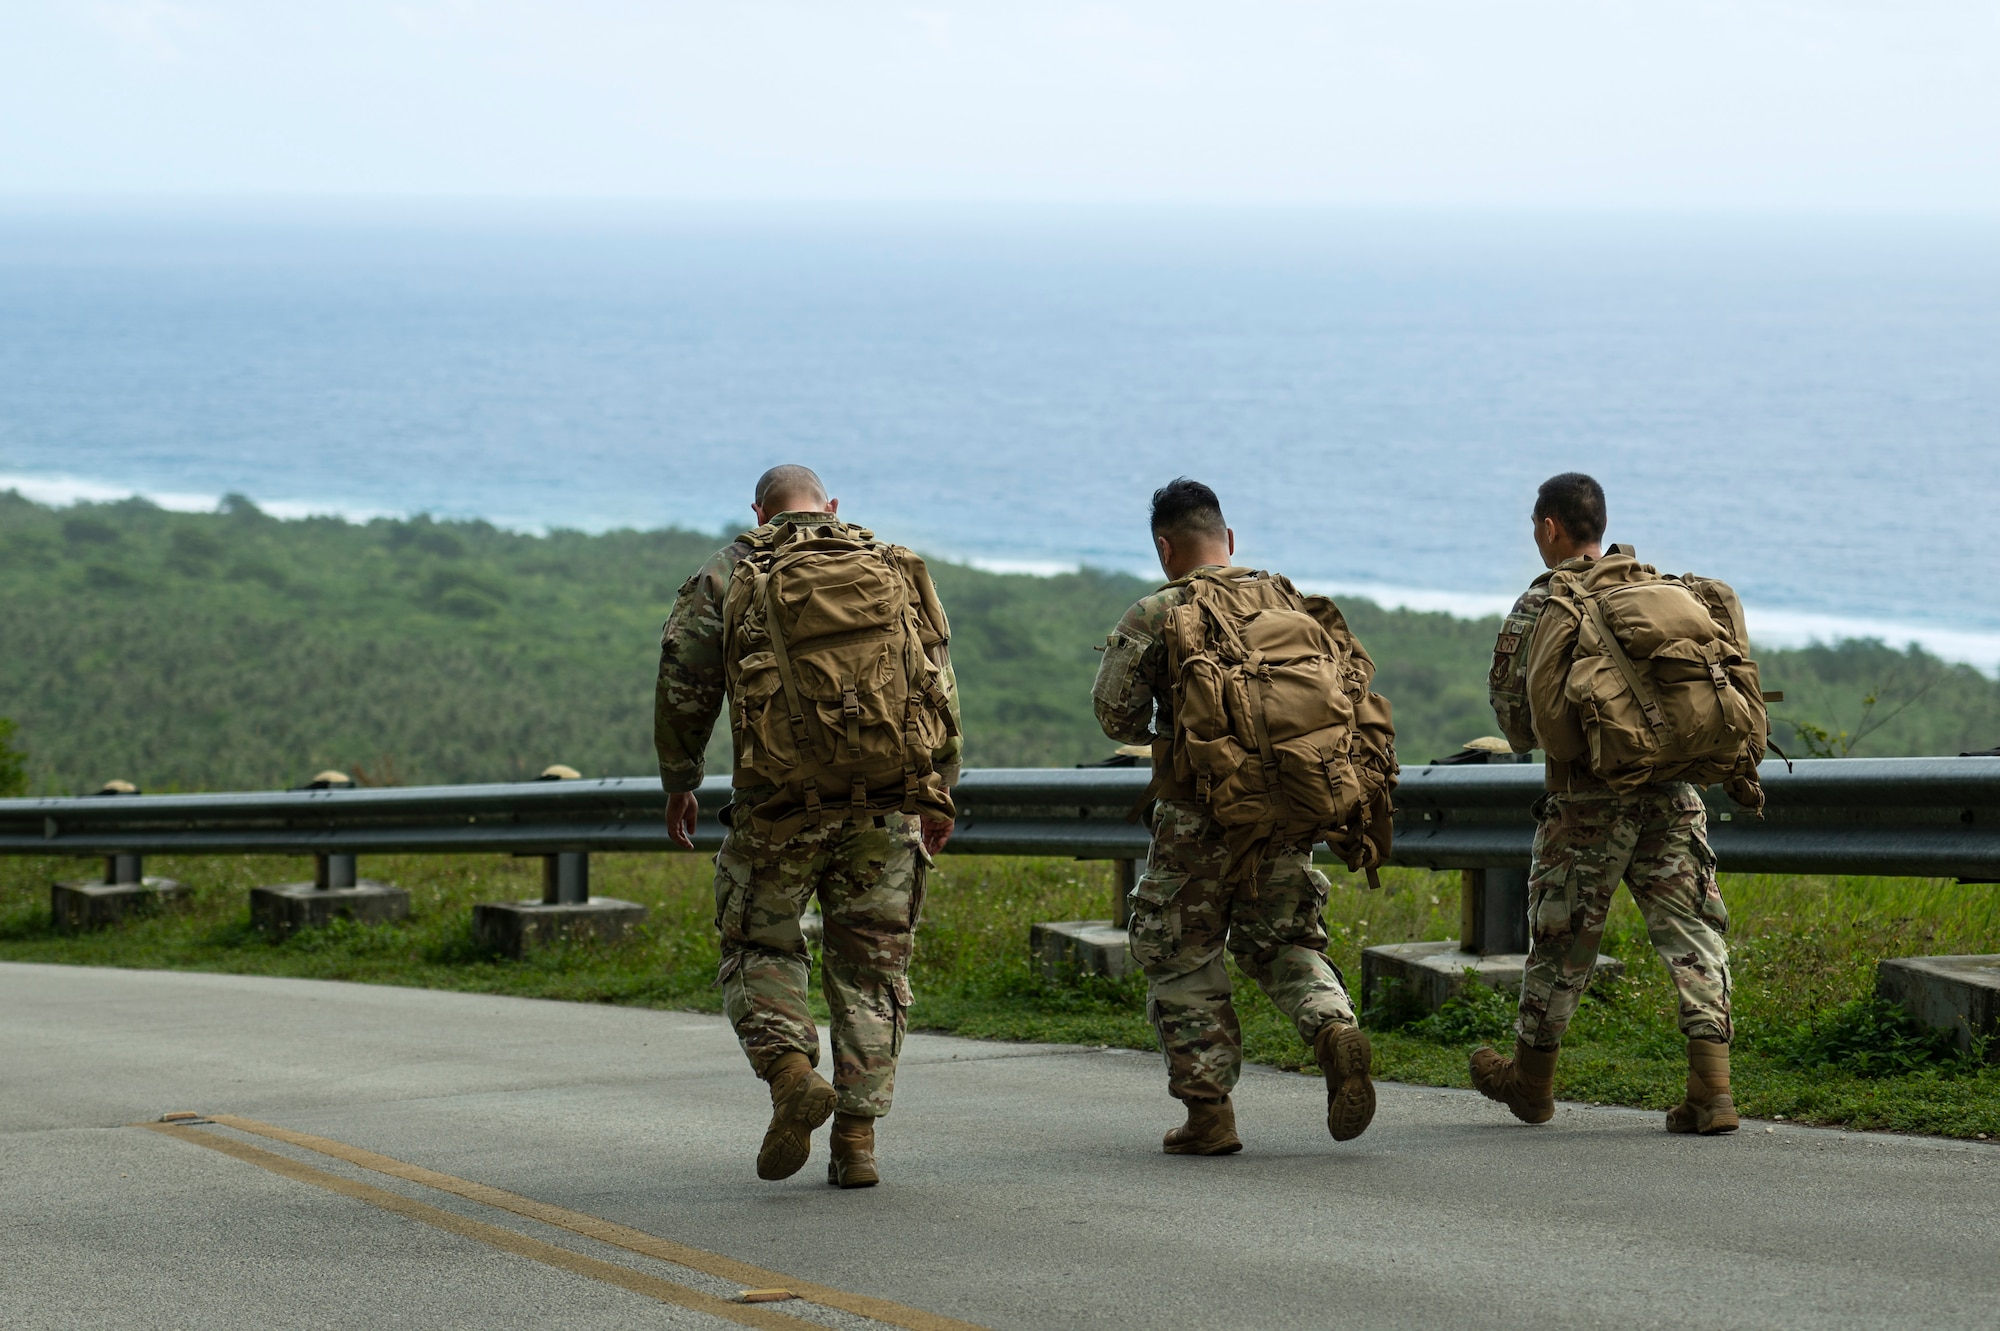 U.S. Air Force service members walk down Sanders Slope during the Office of Special Investigations’ Hustler-6 memorial on Andersen Air Force Base, Guam, Dec. 21, 2022. Since 2016, OSI agents assigned to Andersen AFB have annually honored the Hustler-6, who lost their lives during a mission near Bagram, Afghanistan on Dec. 21, 2015, by rucking up and down Sanders Slope. (U.S. Air Force photo by Airman Spencer Perkins)